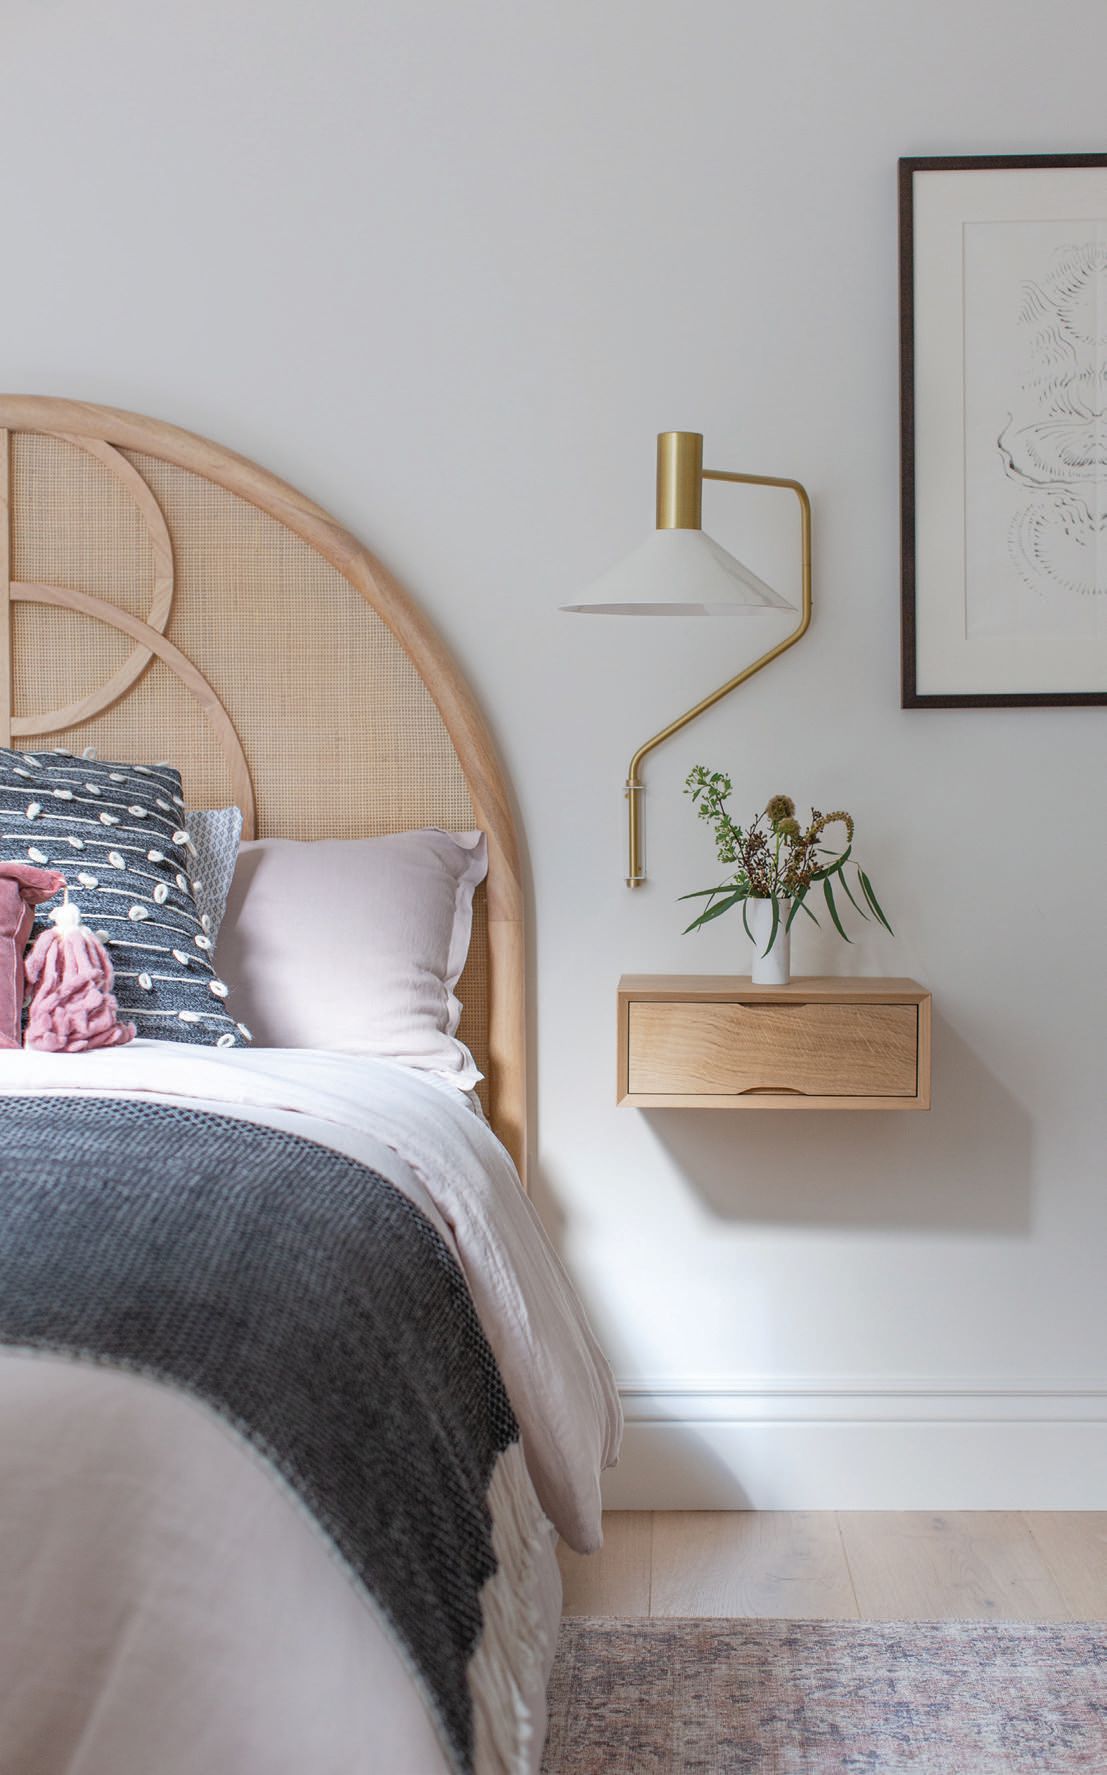 The stunning arch bed from Crate & Barrel is perfectly complemented with a structural Etsy nightstand atop a custom desk built-in. PHOTOGRAPHED BY BRAD KNIPSTEIN